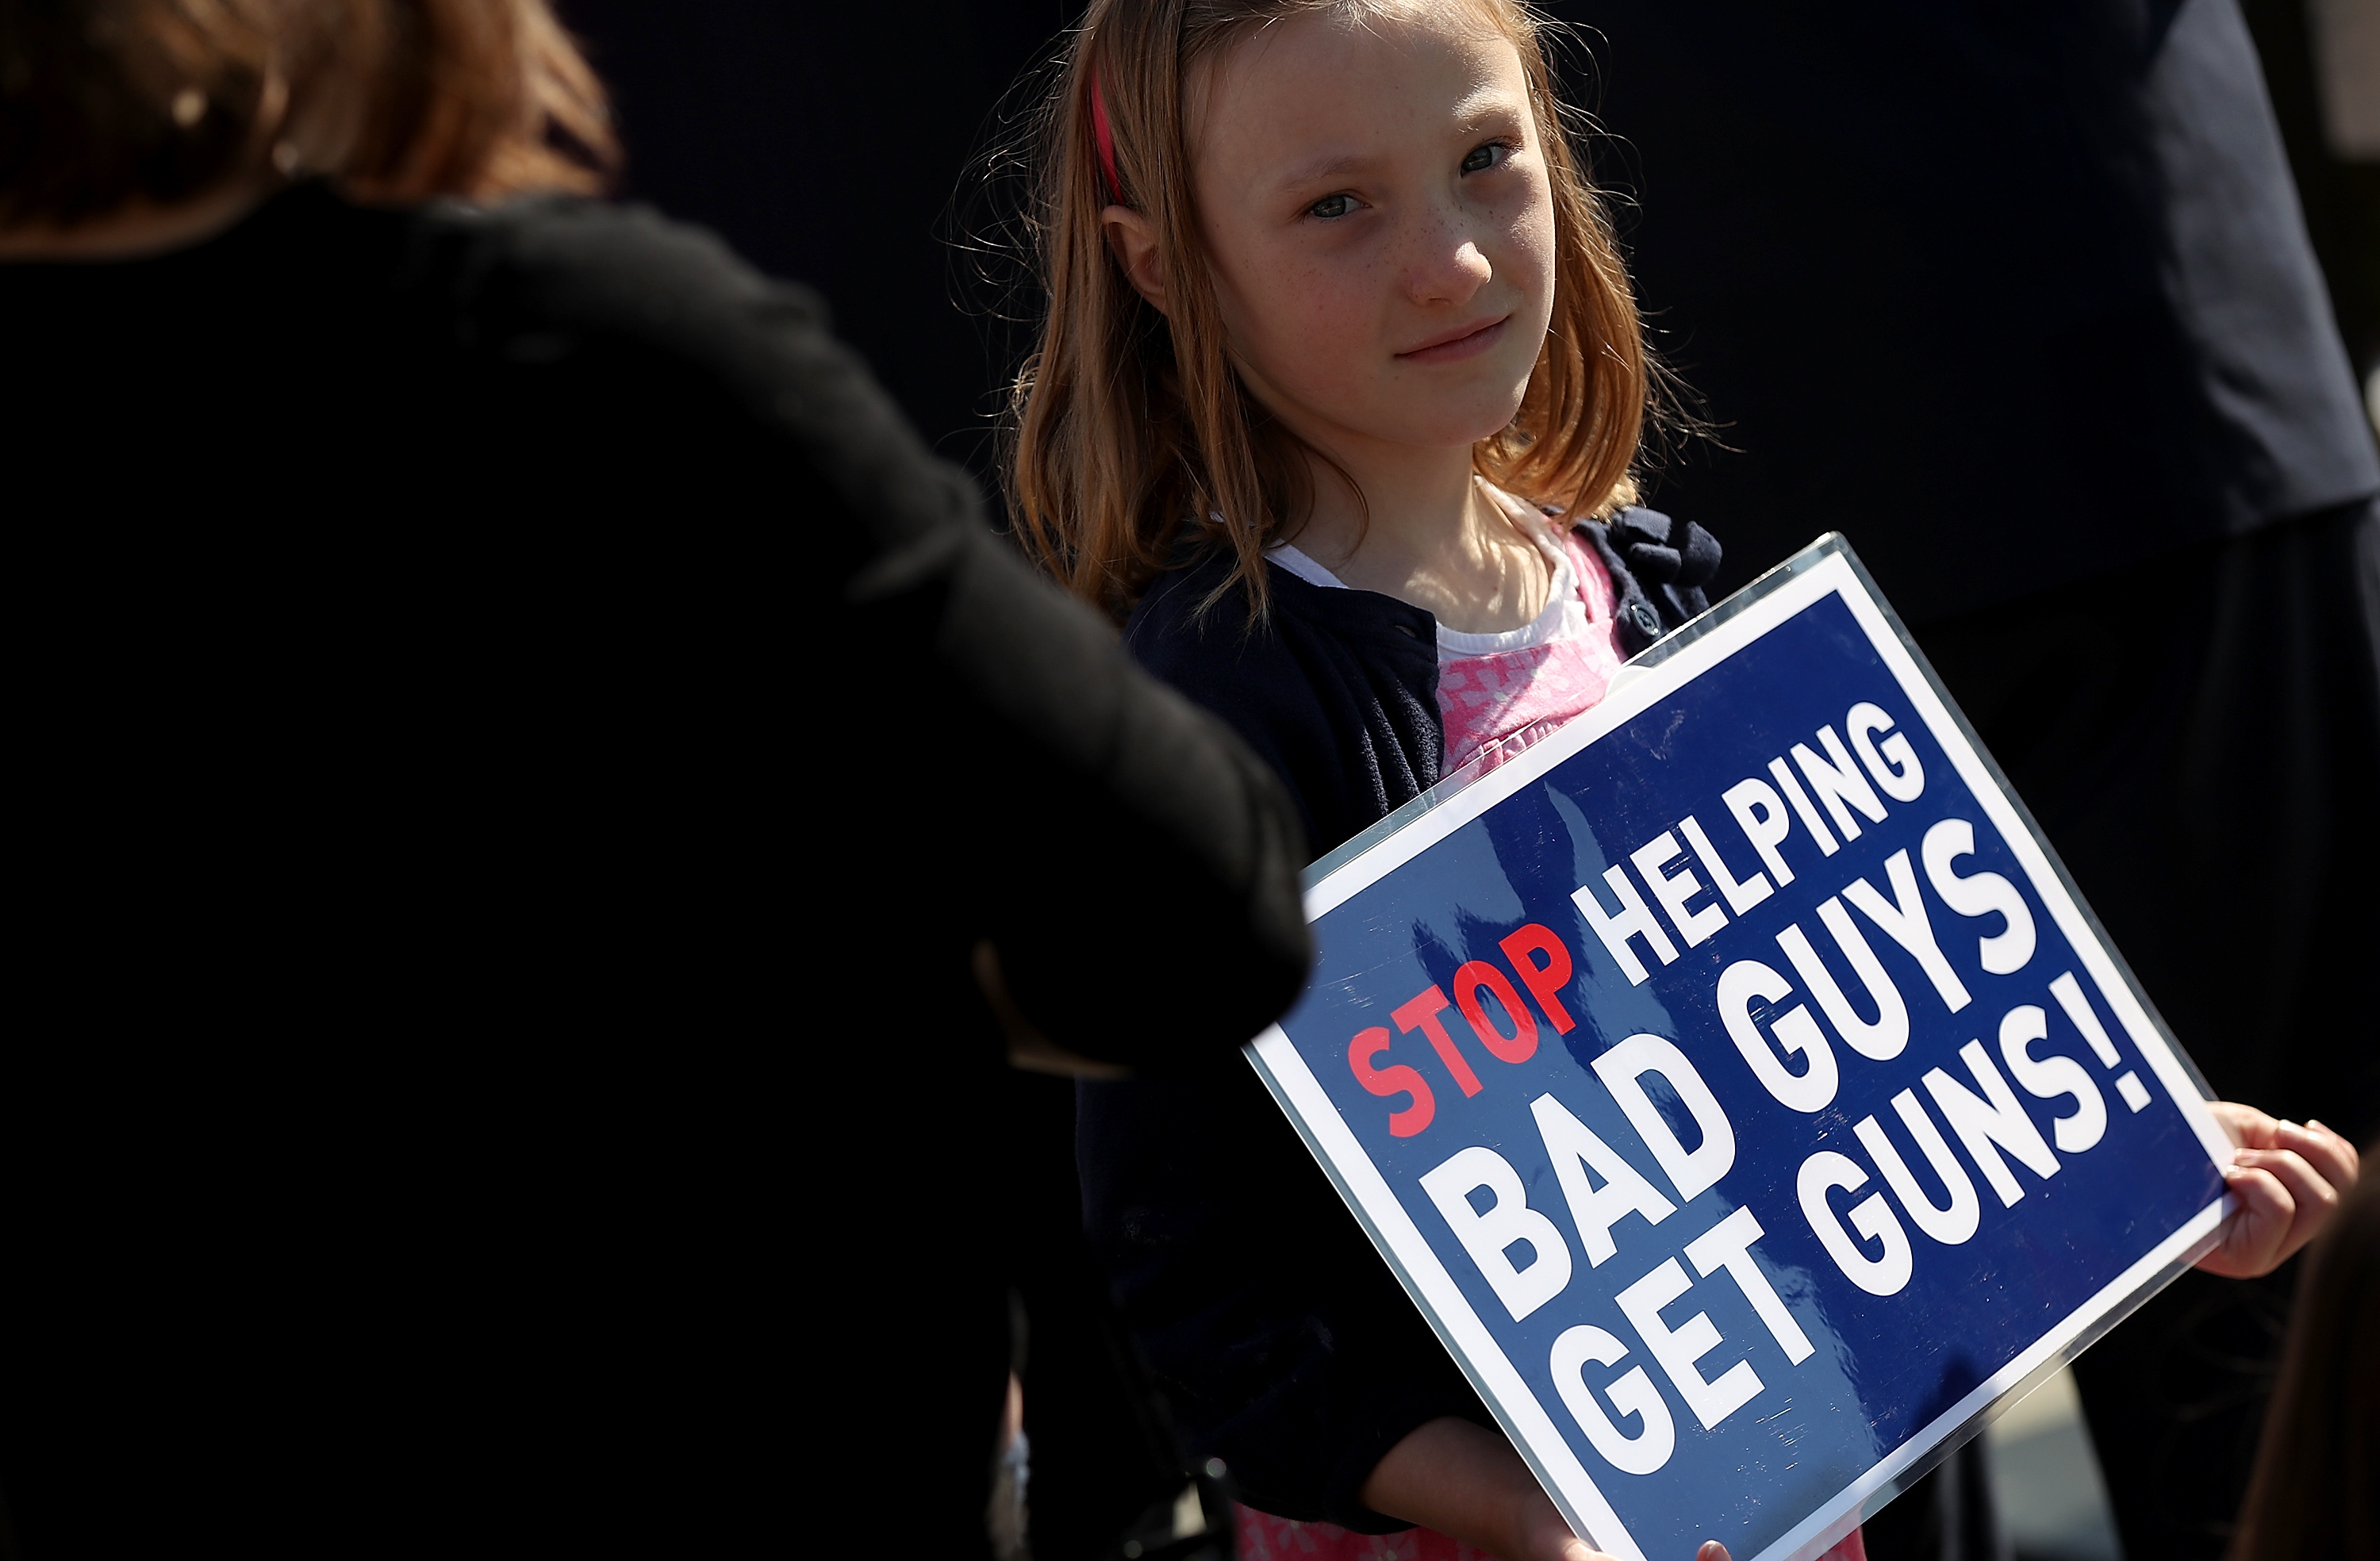 WASHINGTON, UNITED STATES - APRIL 14: A young girl joins gun reform advocates holding a news conference outside the U.S. Capitol April 14, 2016 in Washington, DC. Members of Congress joined the activists in calling for the repeal of the Protection of Lawful Commerce in Arms Act arguing that their position would "advance sensible, popular legislation to curb the epidemic of gun violence that kills 90 Americans every day."   Win McNamee/Getty Images/AFP